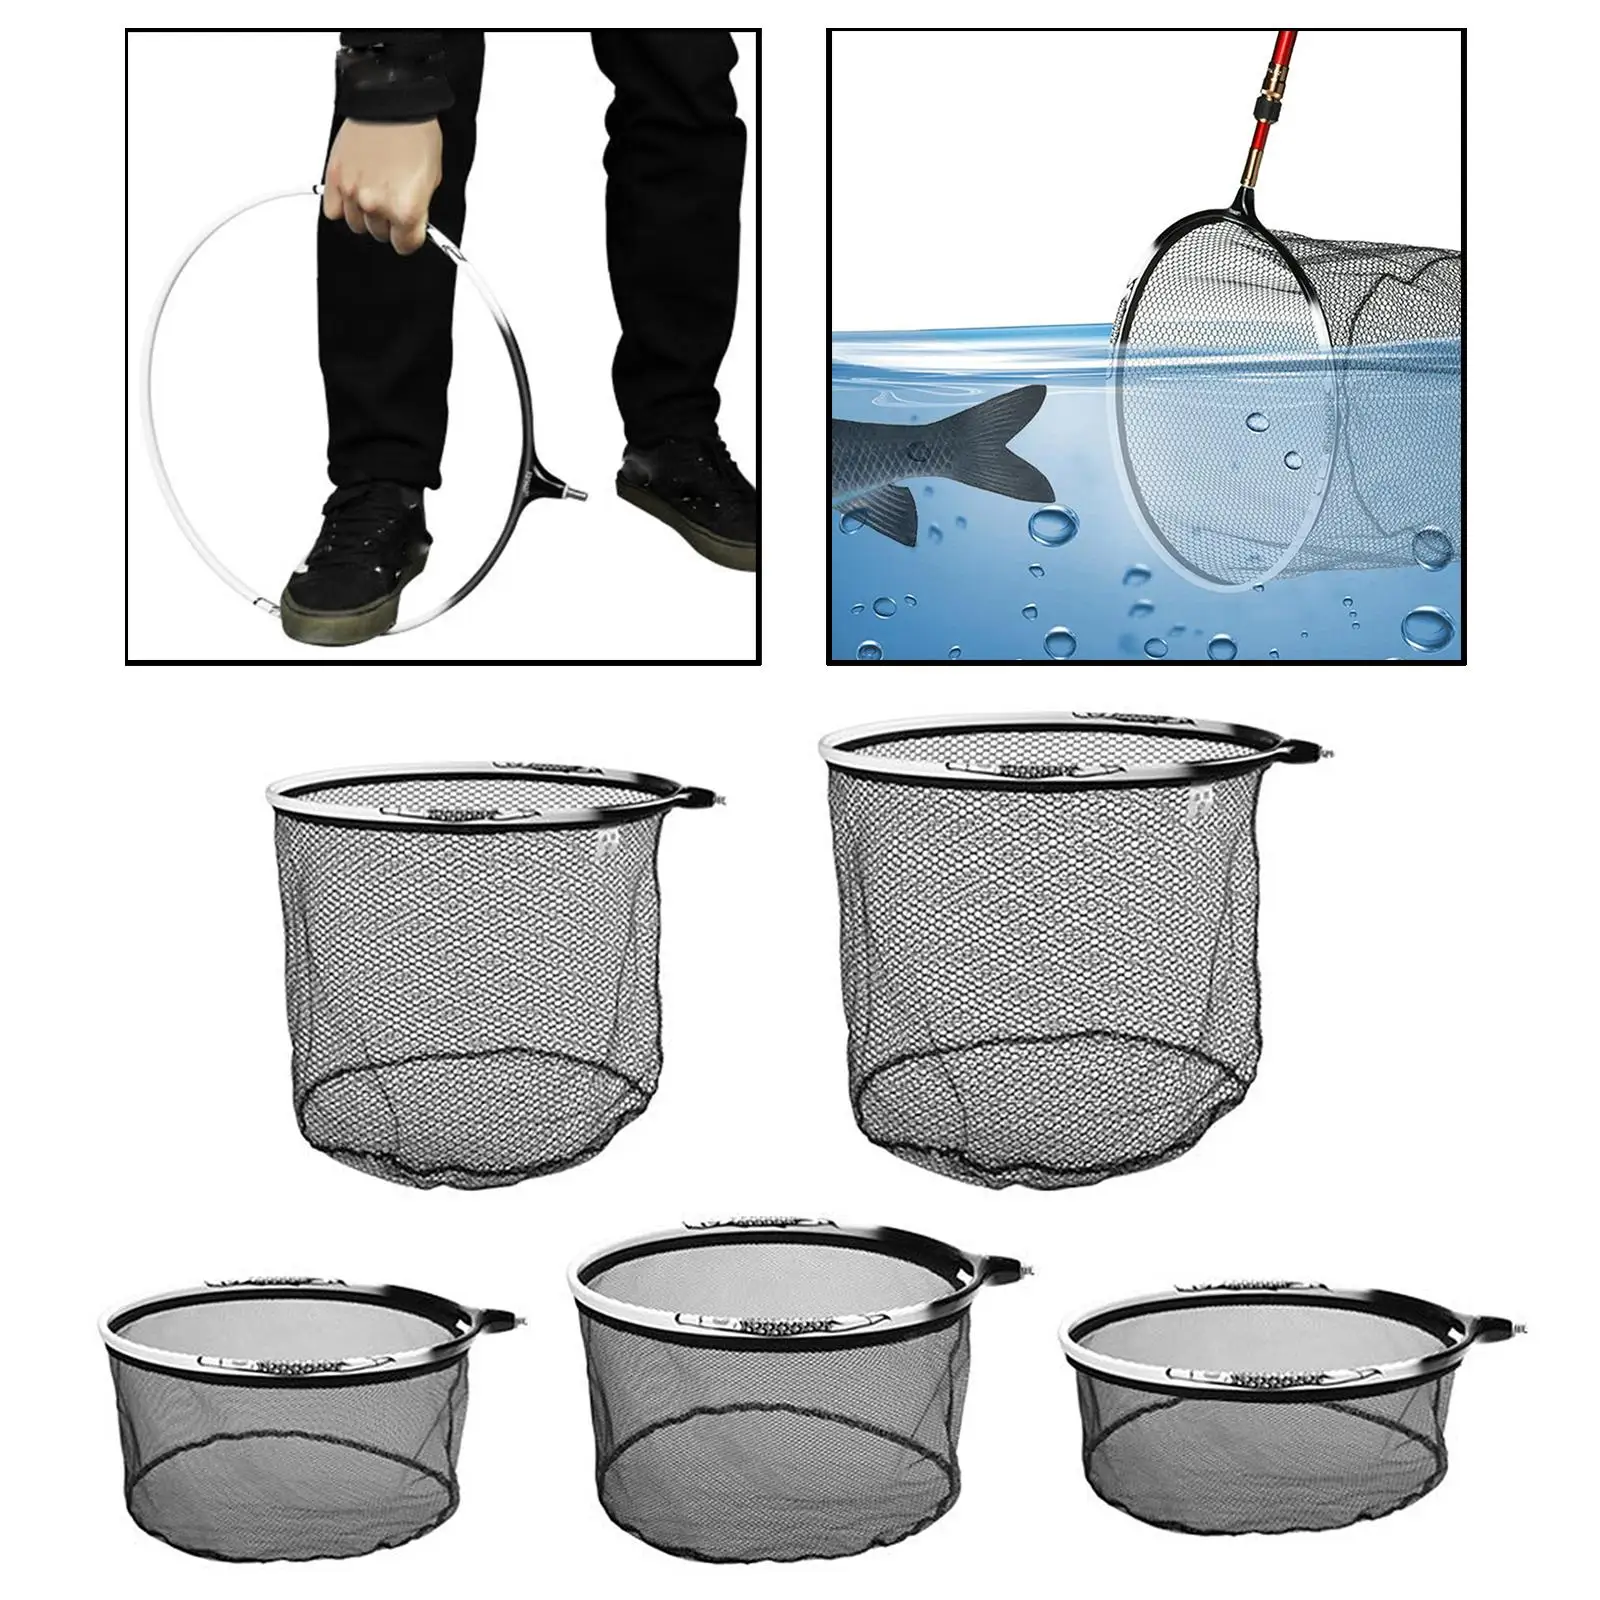 Floating  for Steelhead, Salmon, Fly, Kayak, Catfish, Bass, Trout Fishing, Rubber Coated Landing Net for , Compact